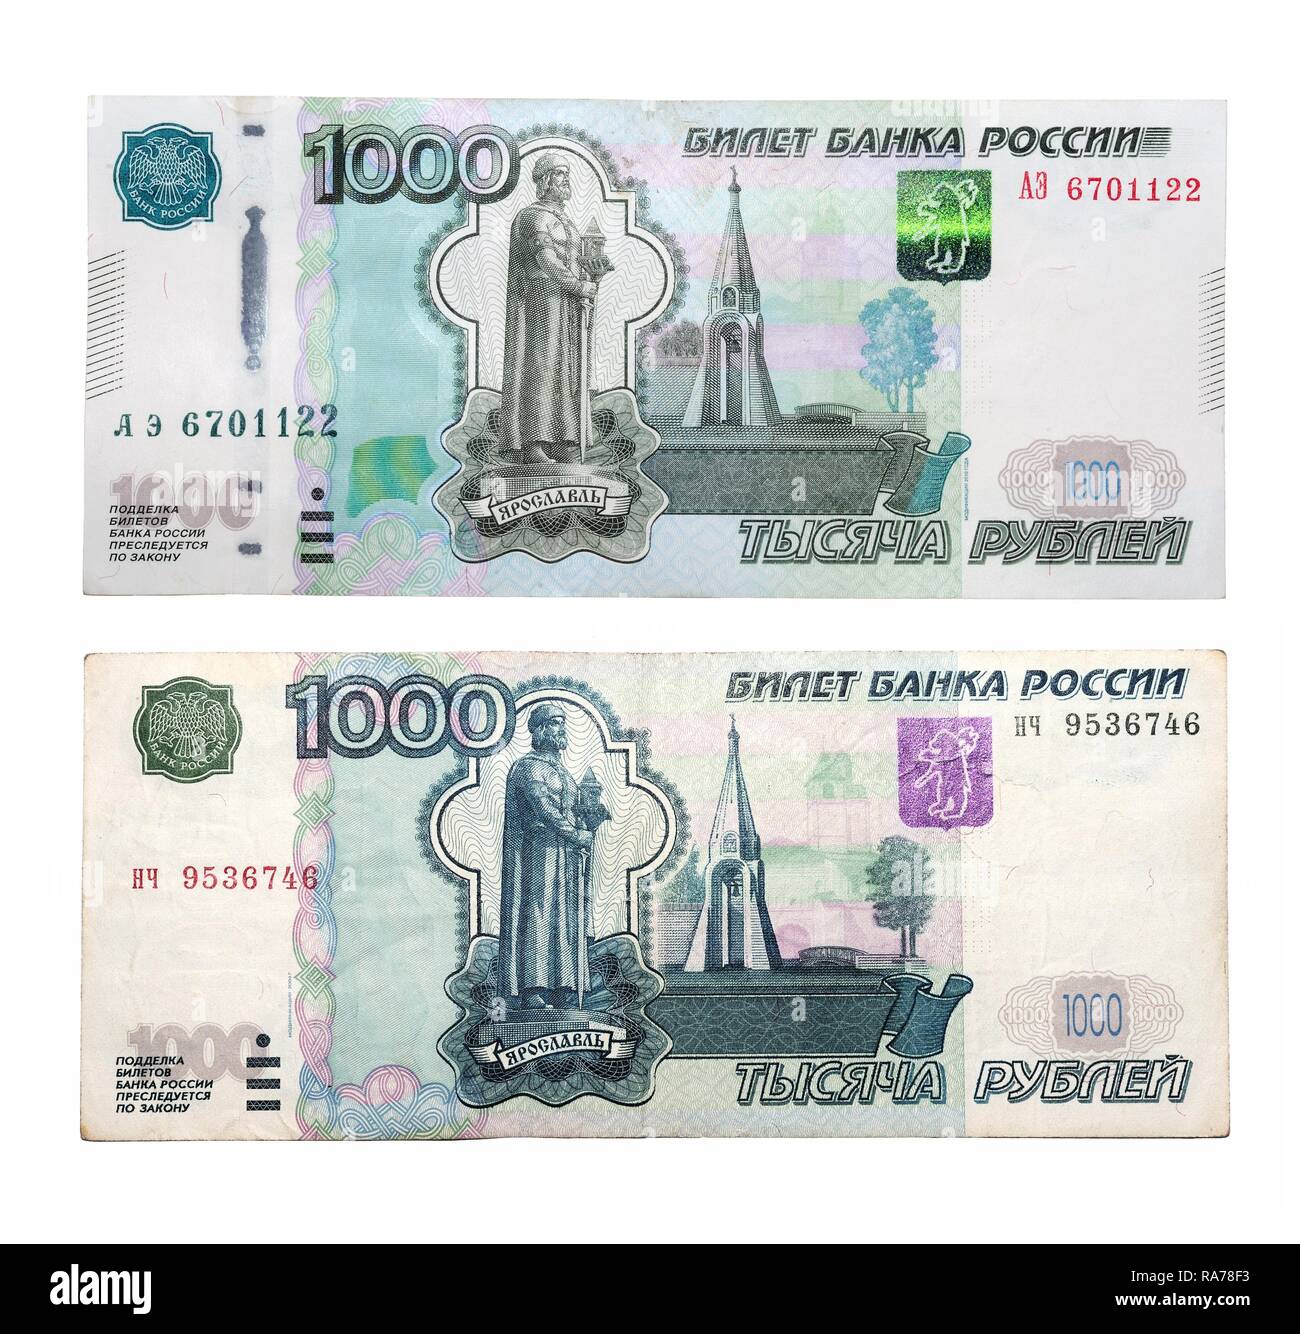 Detail Russian Currency Images Nomer 14